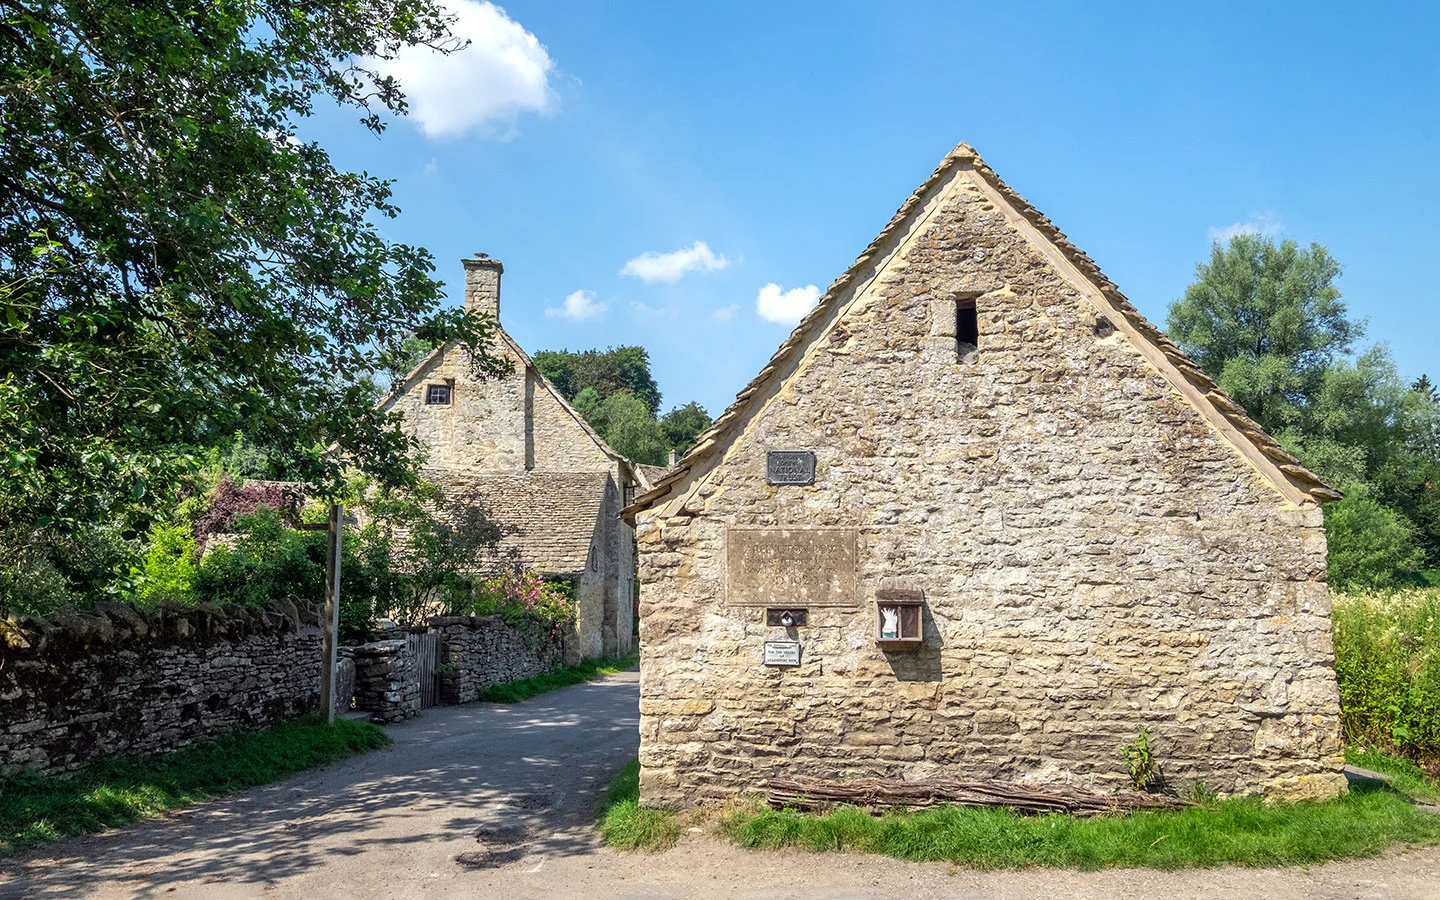 The entrance to Arlington Row in Bibury, Cotswolds